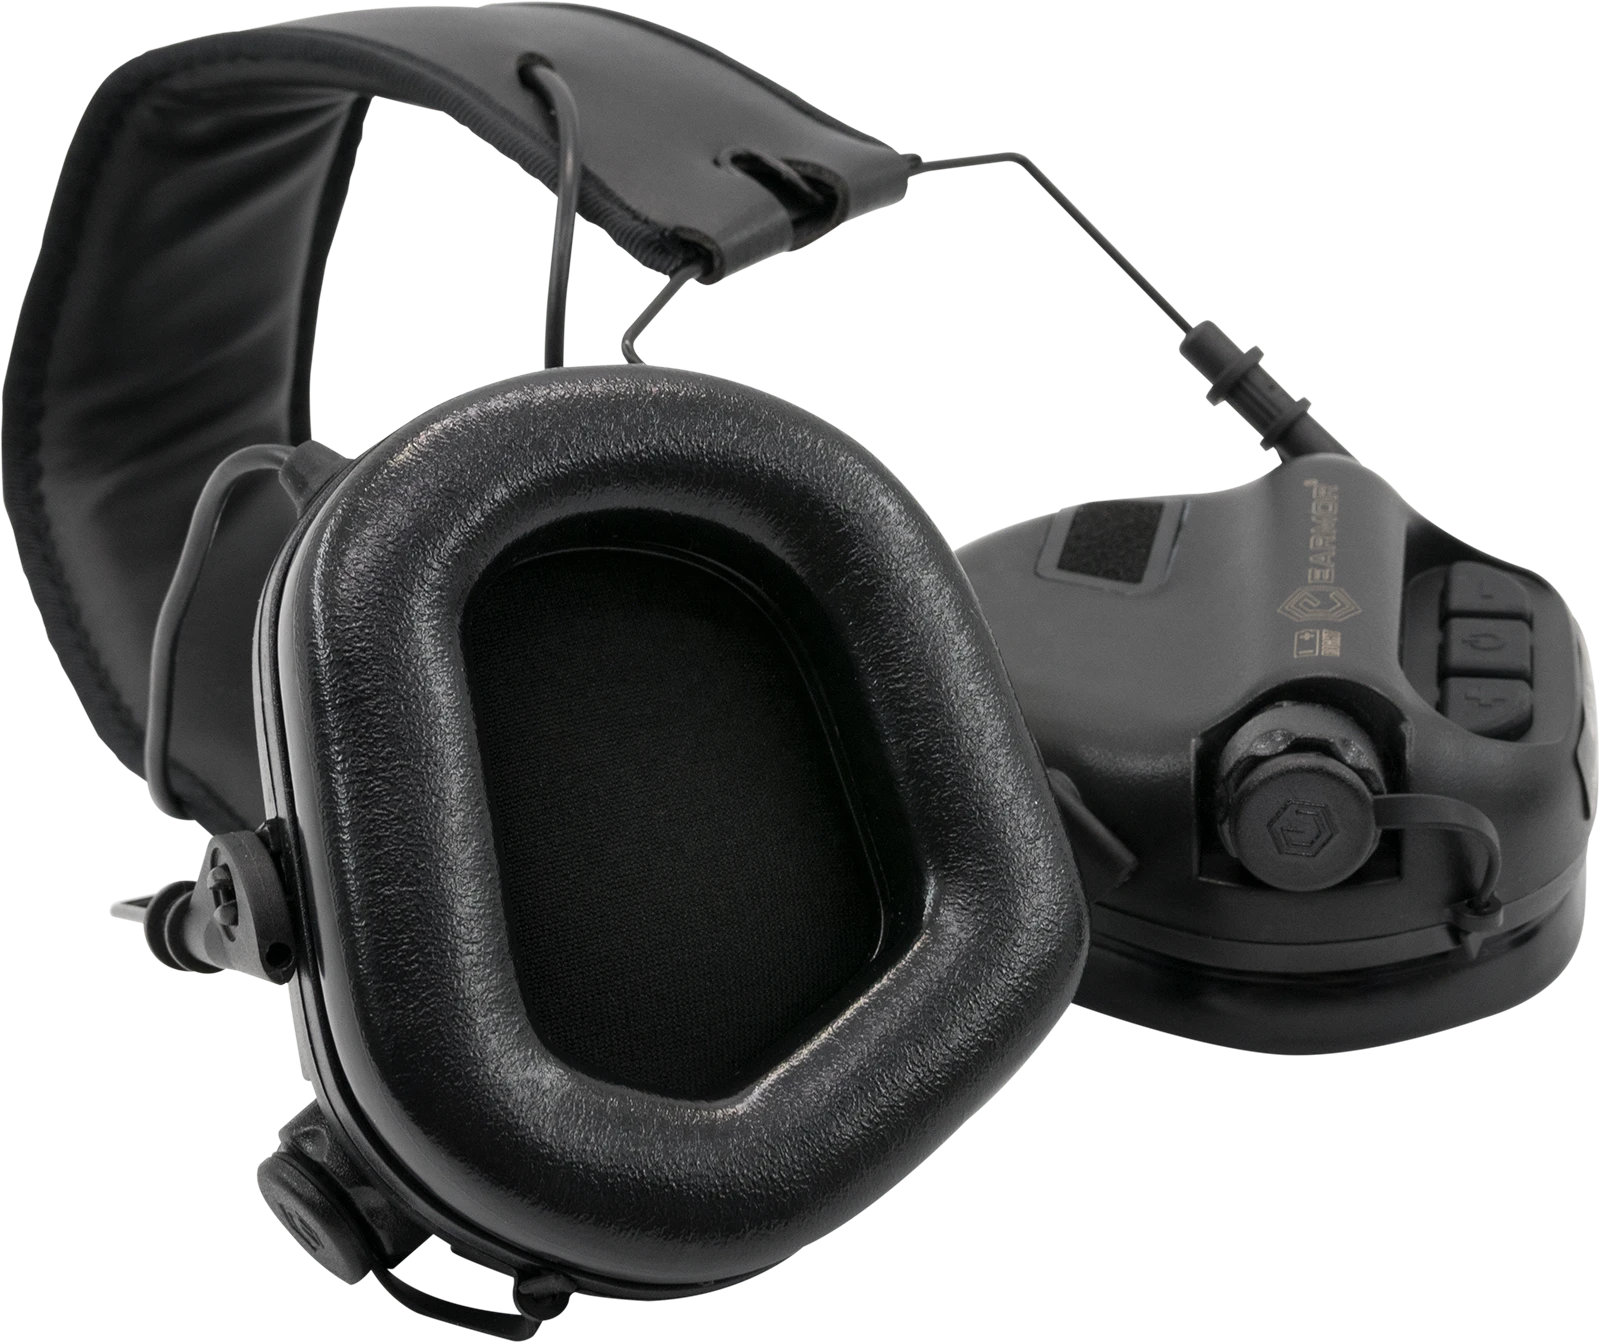 OPSMEN EARMOR M31 Sound Amplification Electronic Hearing Protector Range Shooting Hunting Earmuff with AUX Input NRR22 Police